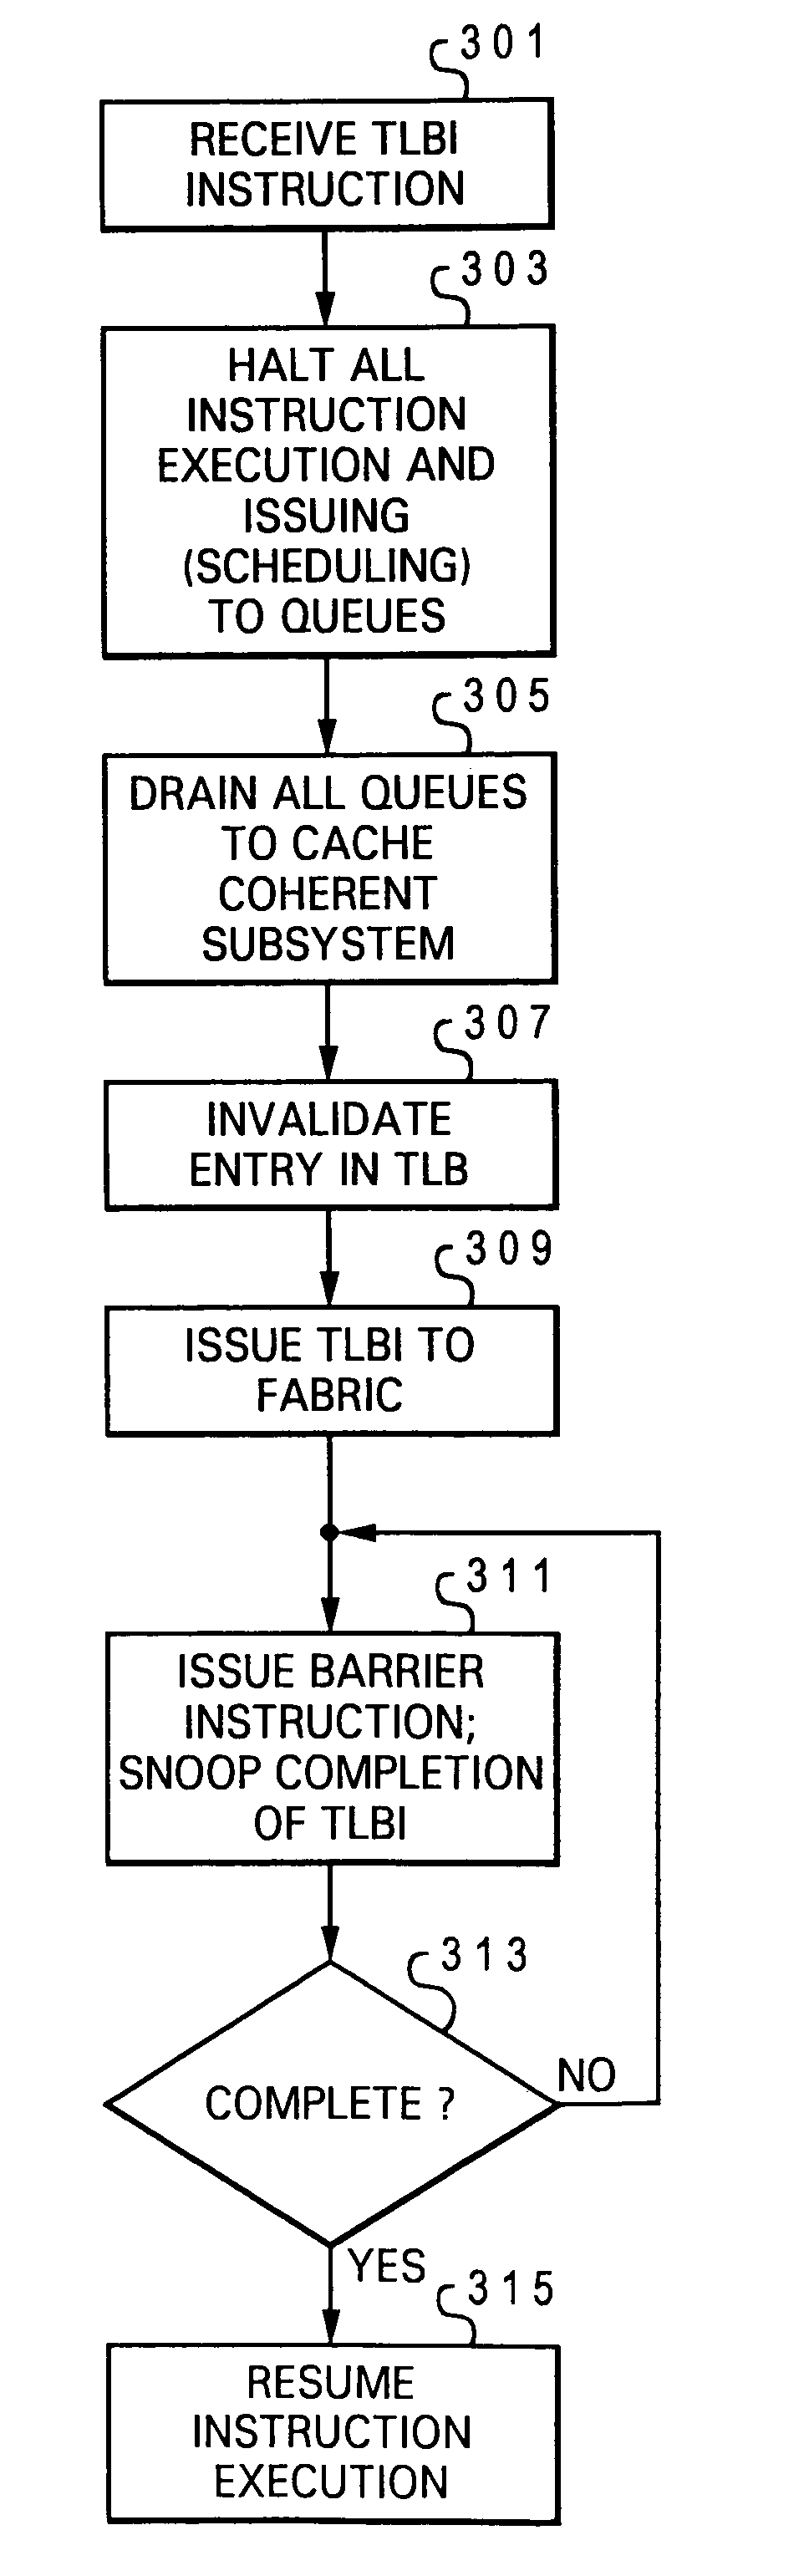 Multiprocessor system supporting multiple outstanding TLBI operations per partition